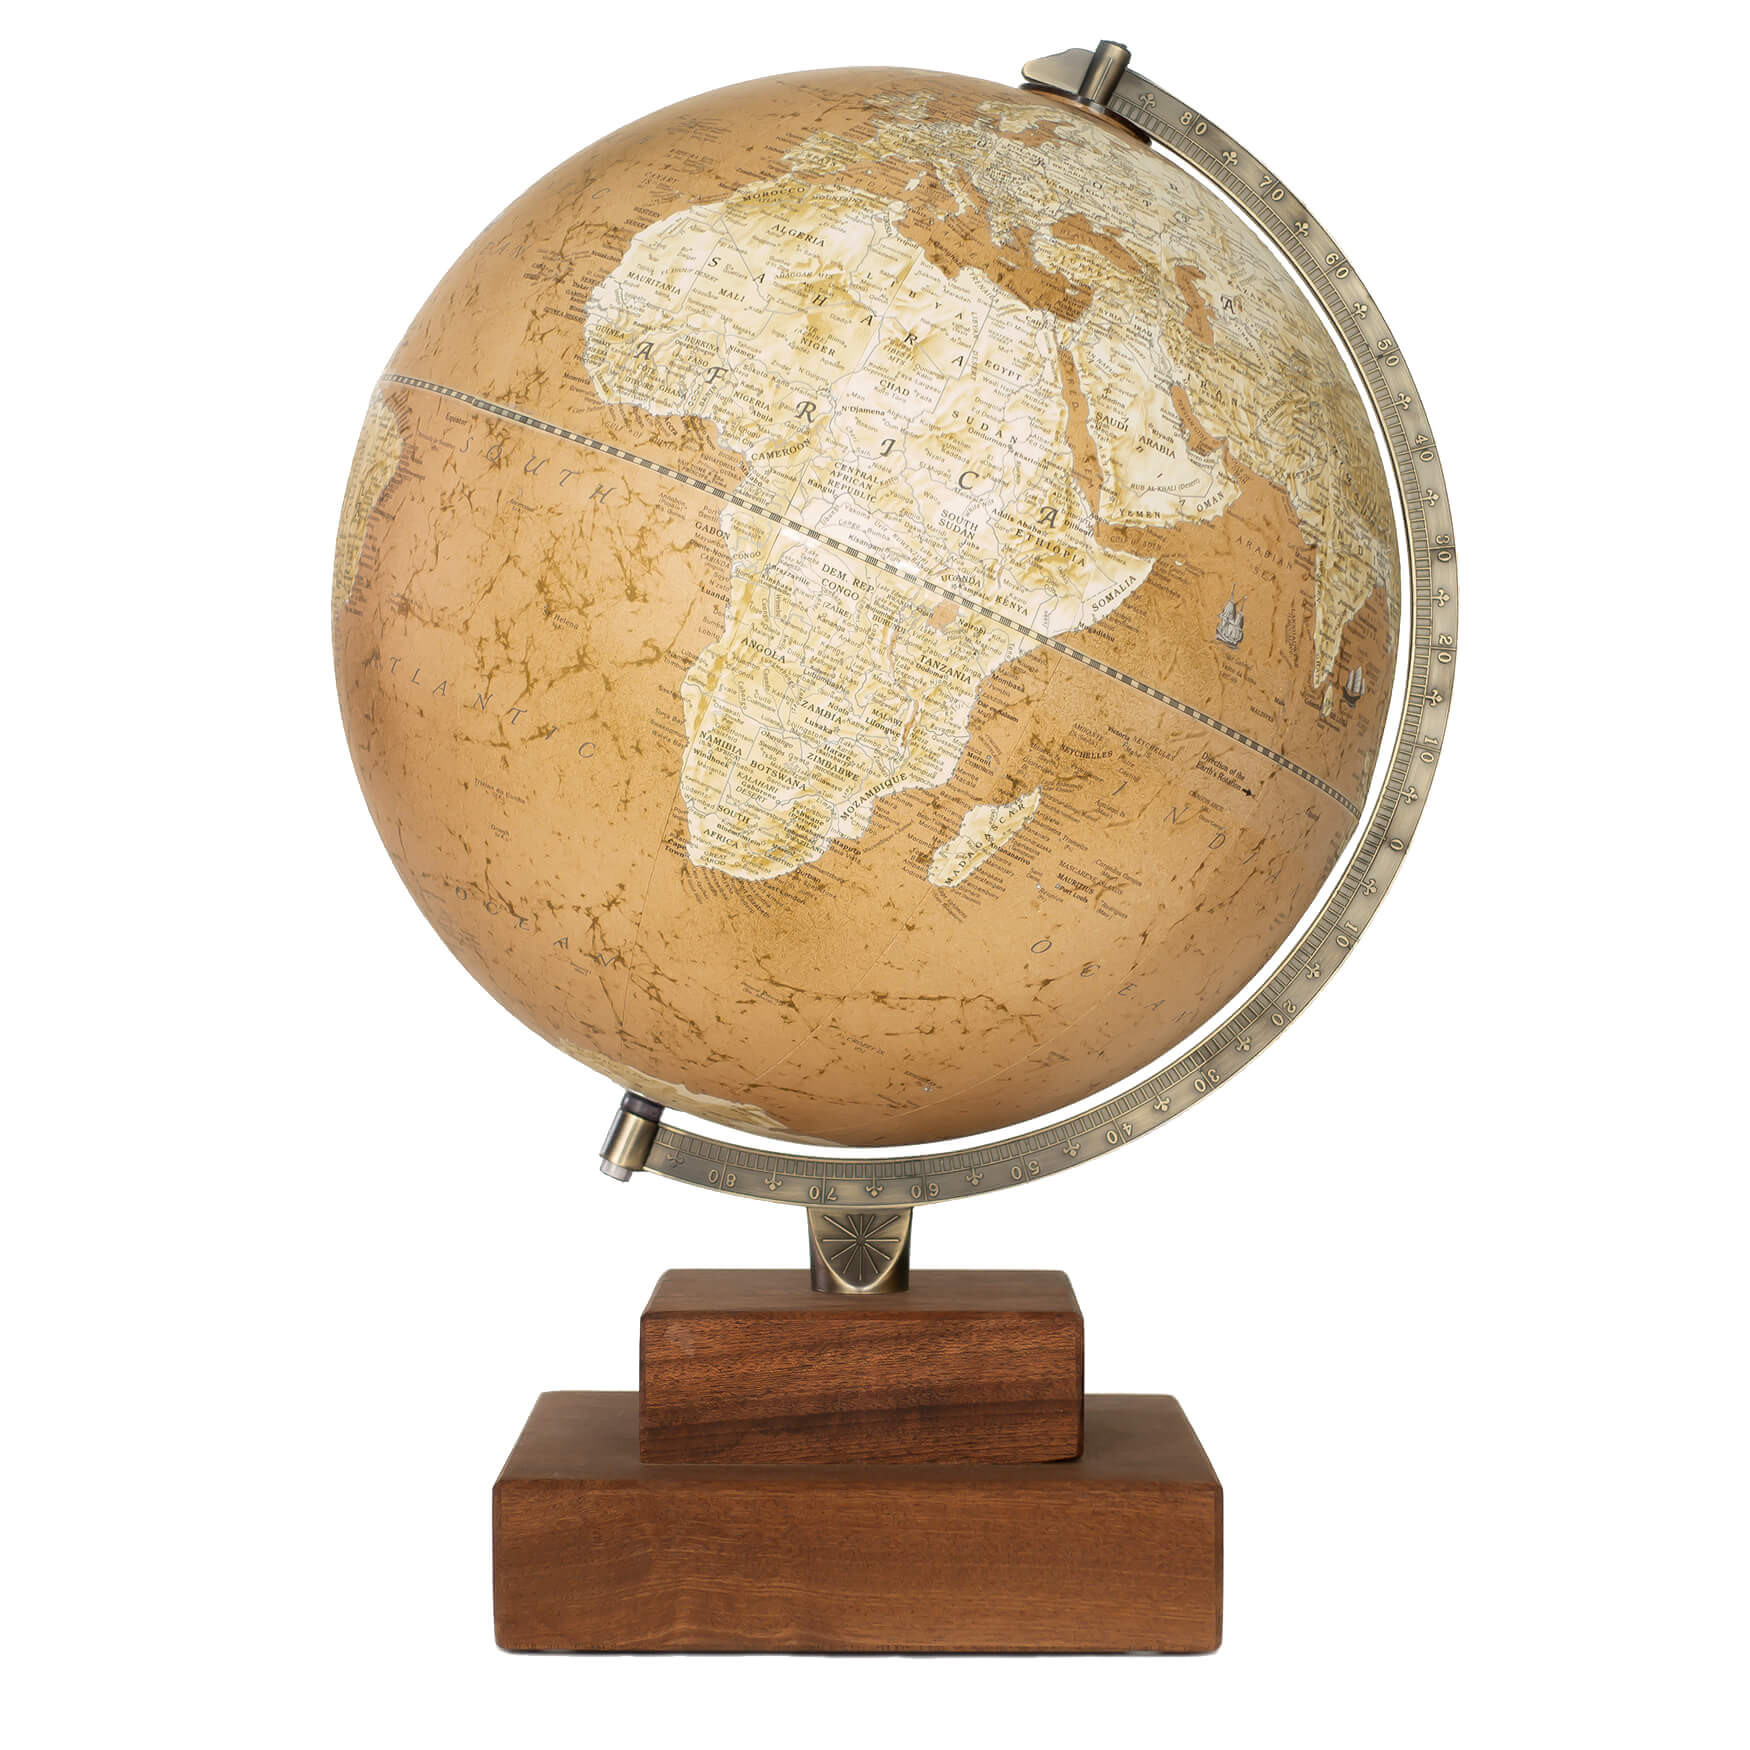 Waller & Wood Woodworks Sapele Gold Soft Touch Globe